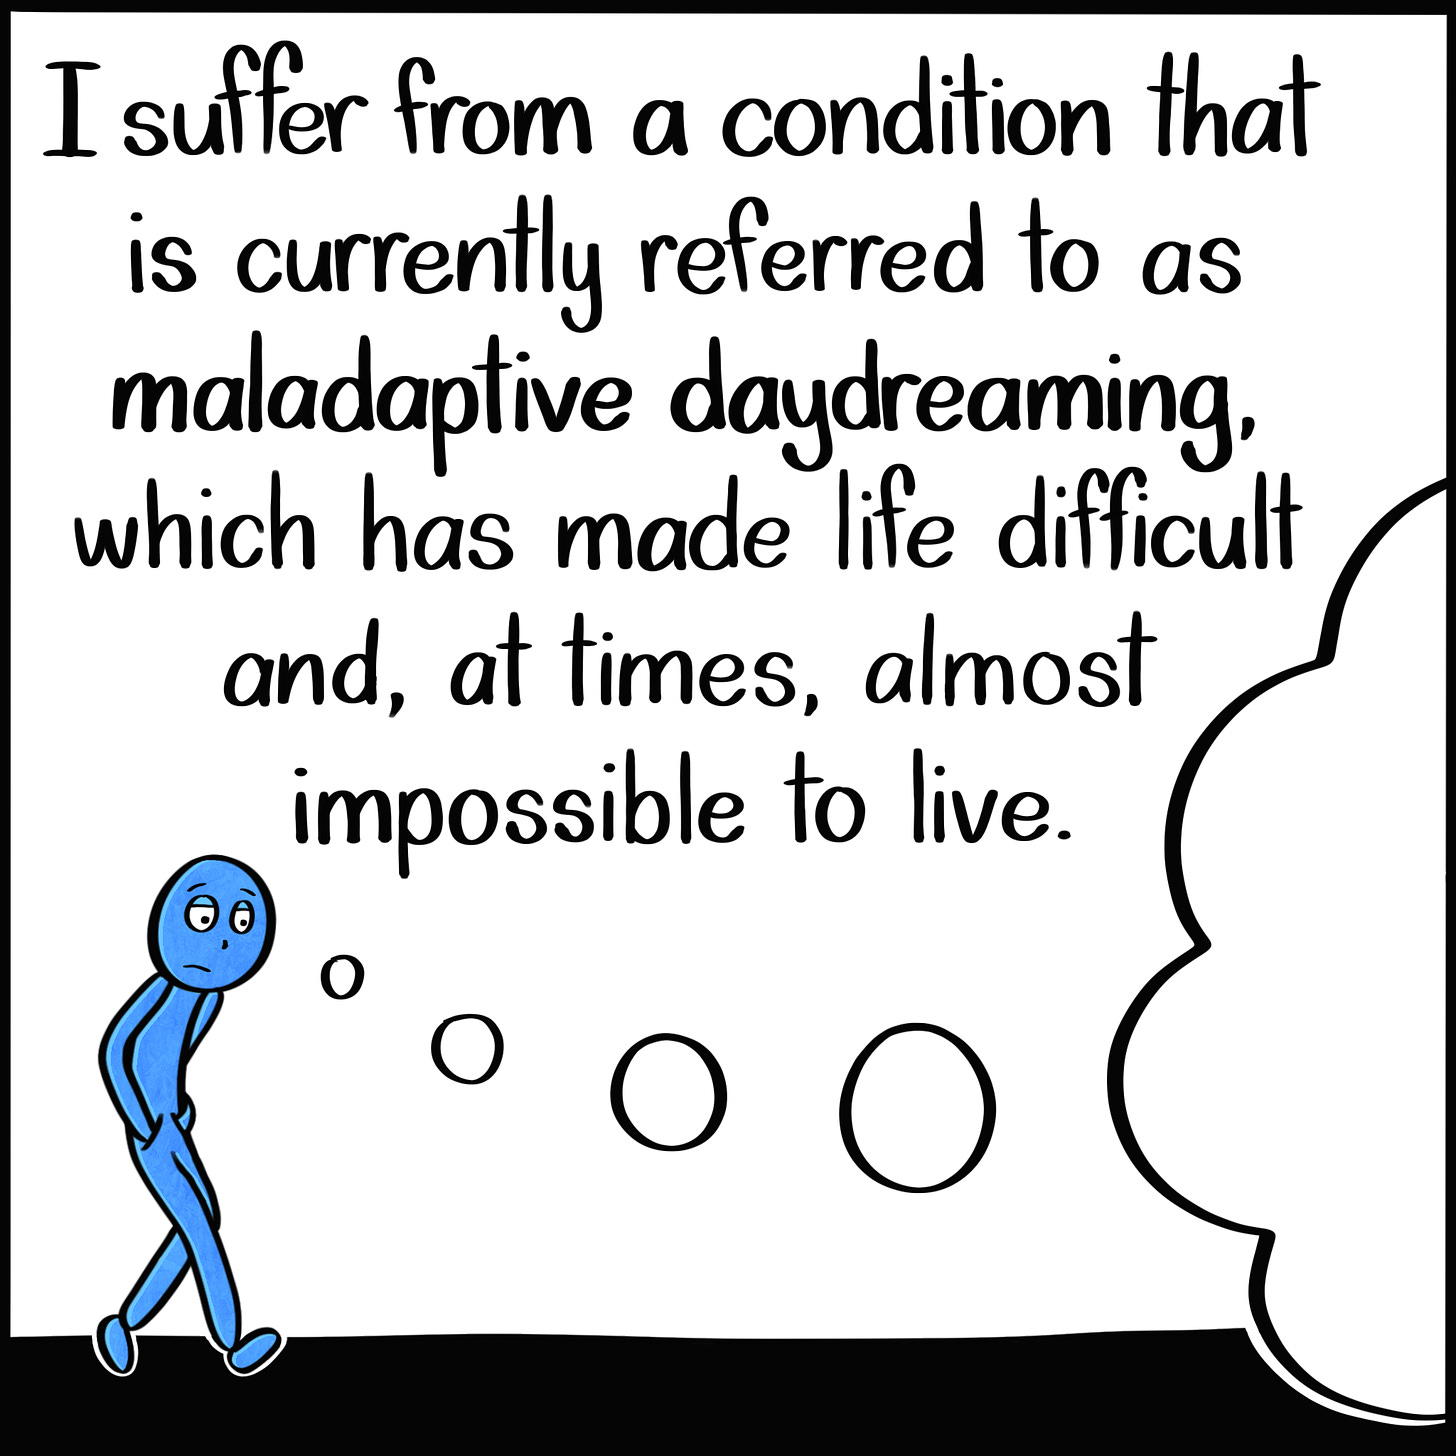 Caption: I suffer from a condition that is currently referred to as maladaptive daydreaming, which has made life difficult and, at times, almost impossible to live. Image: The Blue Person walks, slouching, with a large dream bubble coming from their head.